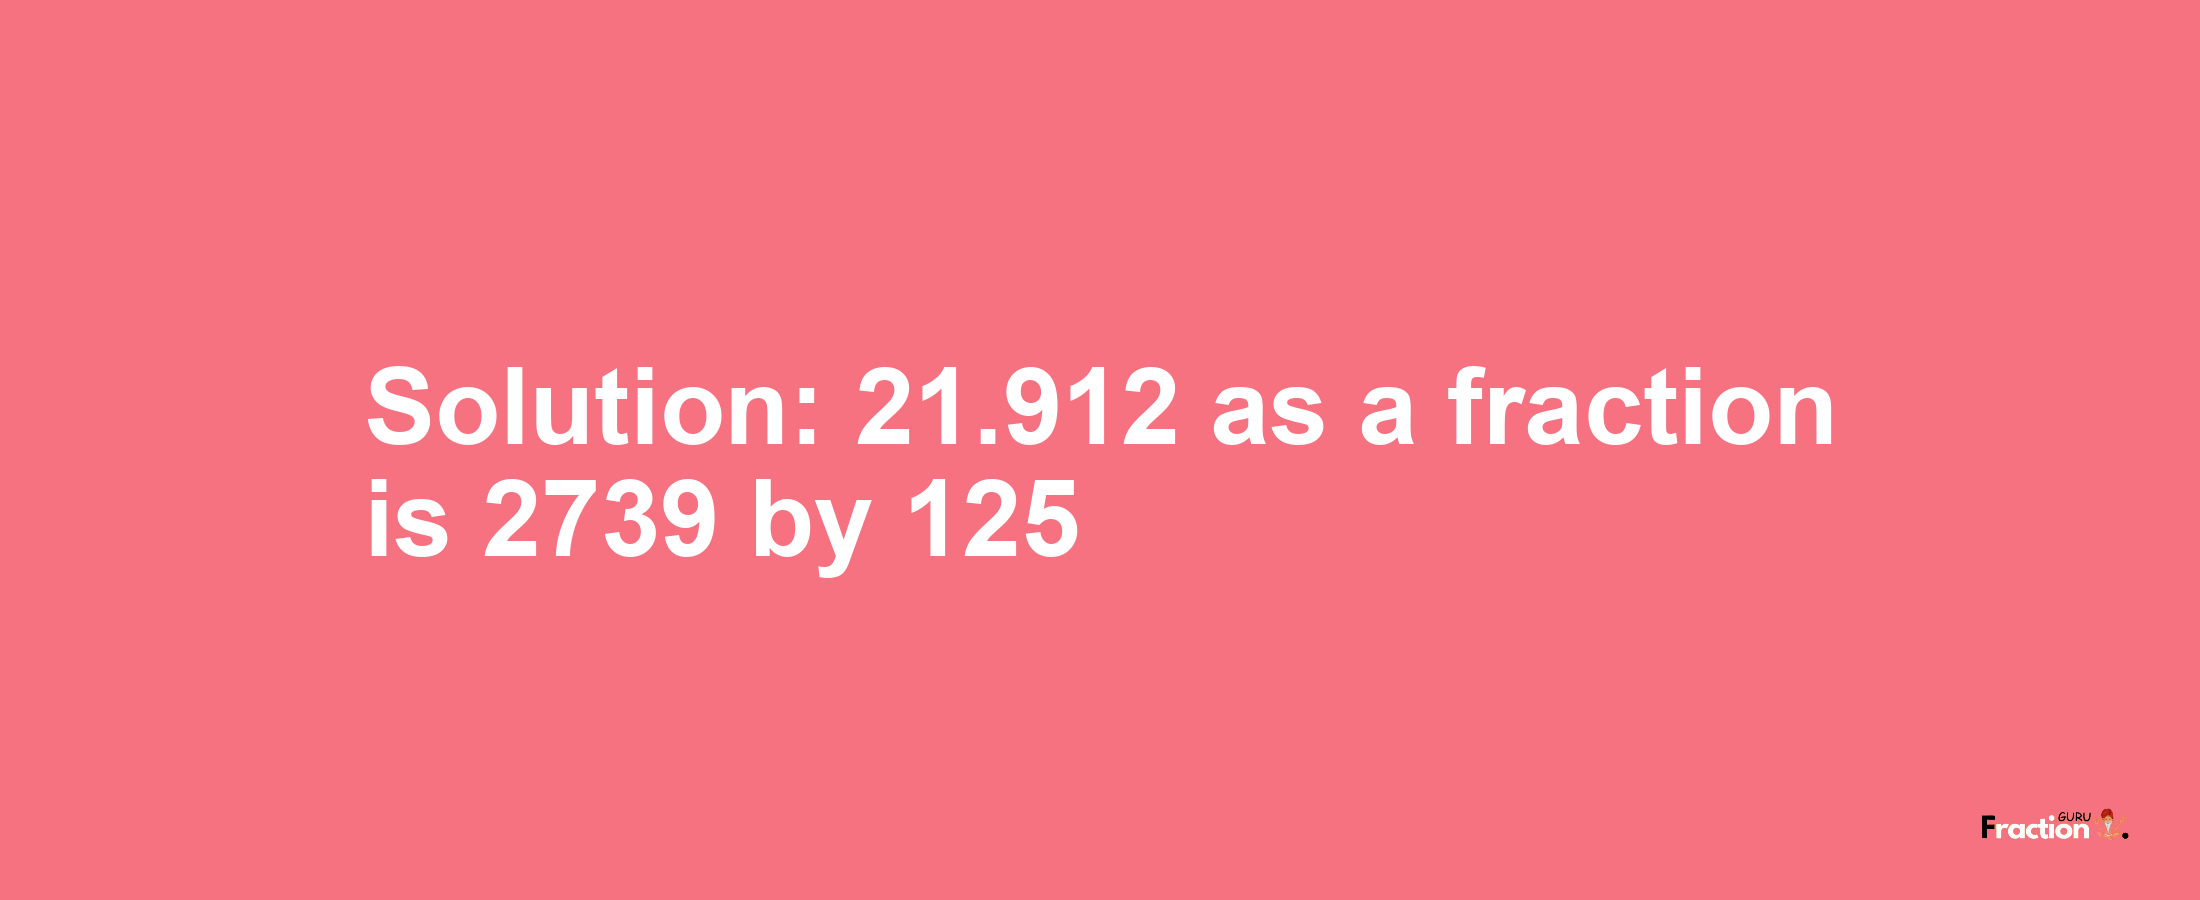 Solution:21.912 as a fraction is 2739/125